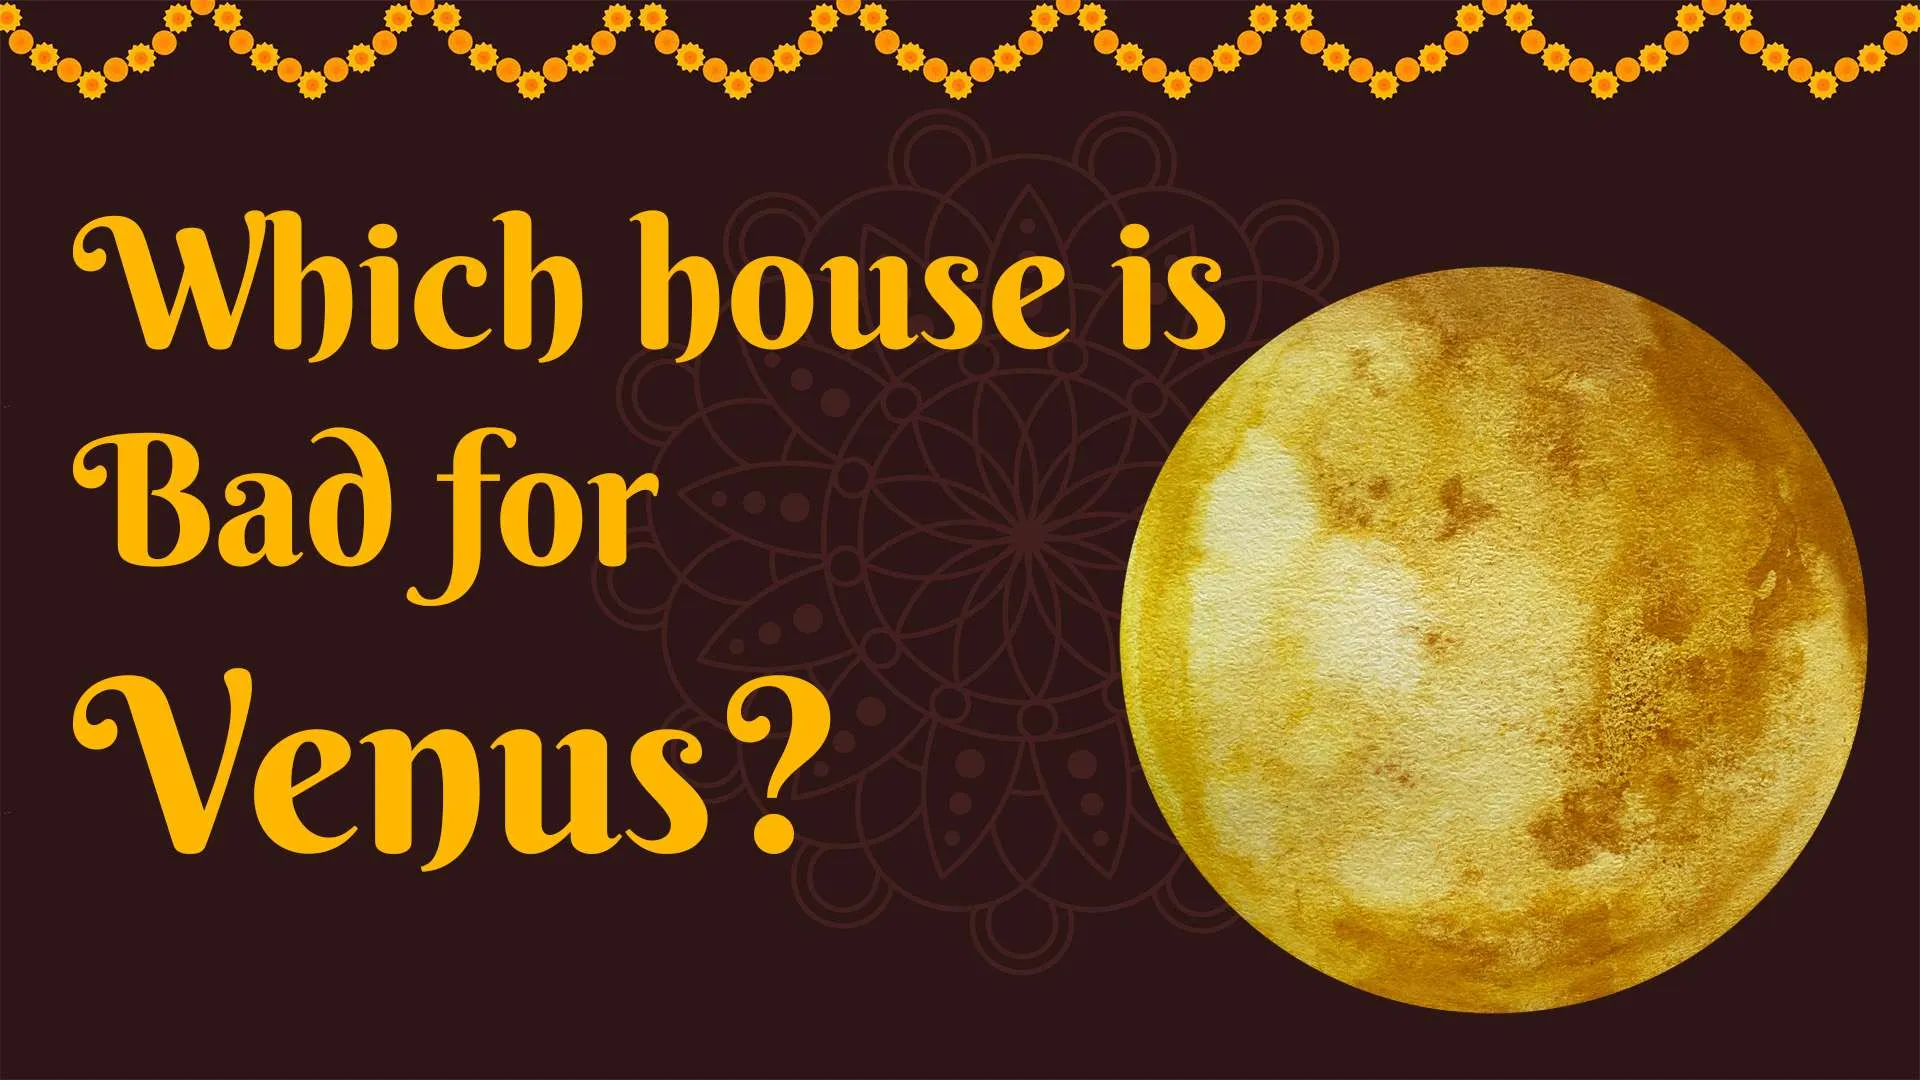 Which houses are bad for venus?